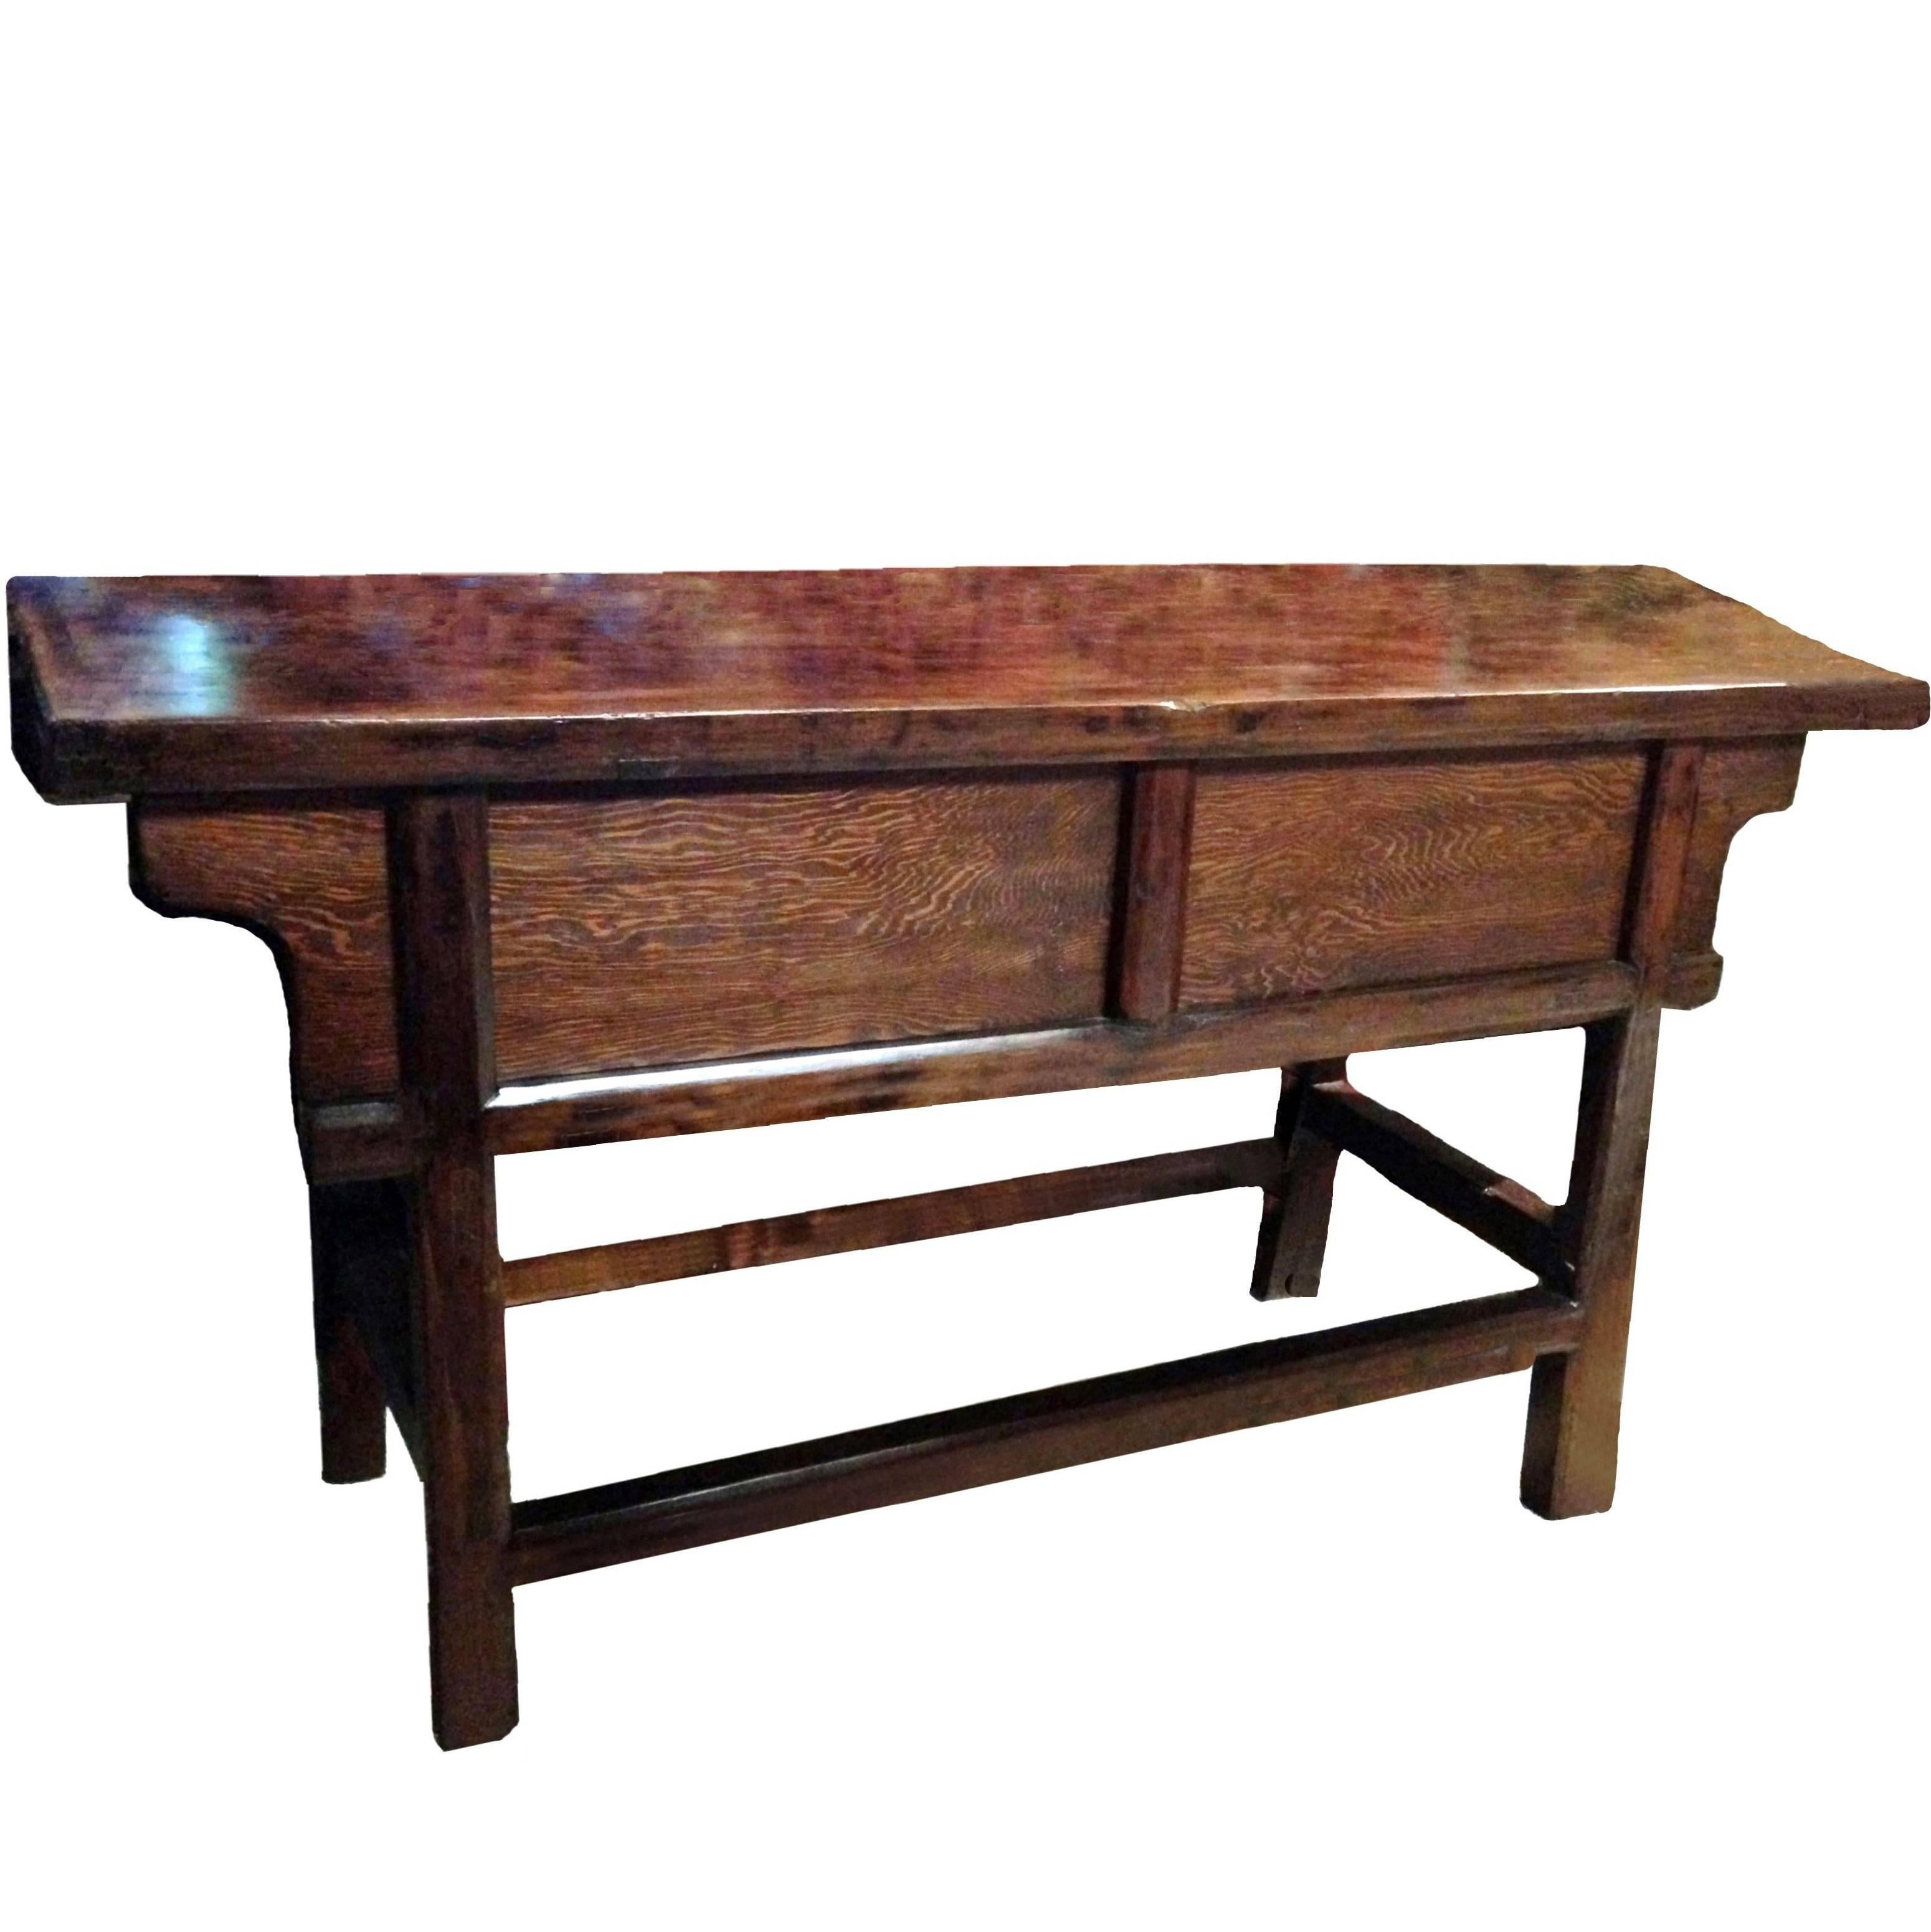 Antique Farm Table with Sliding Doors and Single Board Top